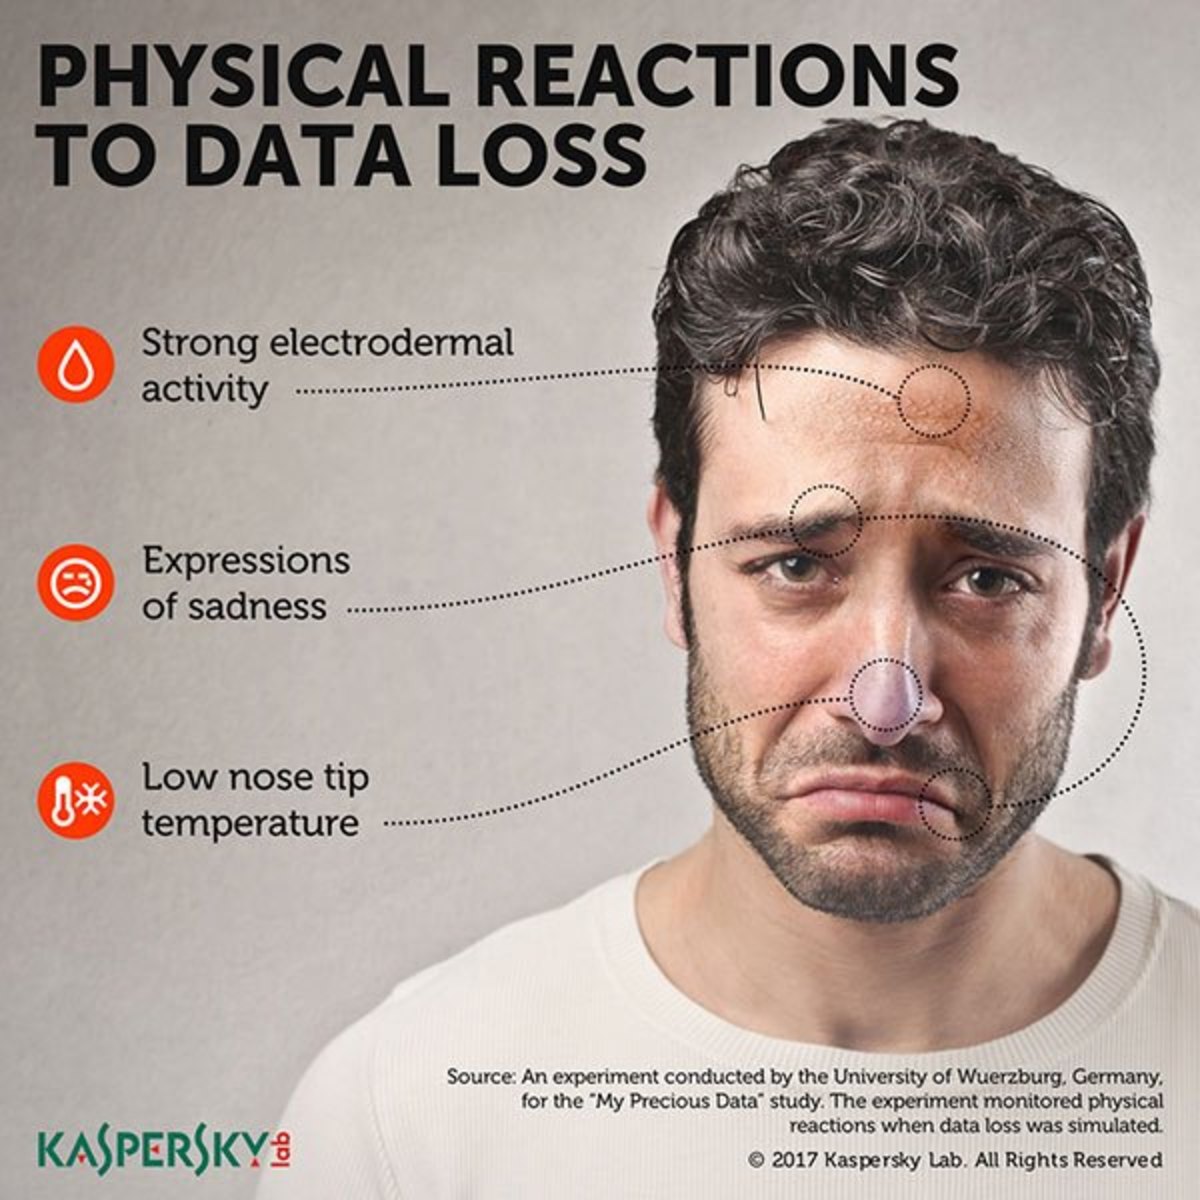 kaspersky physical reactions